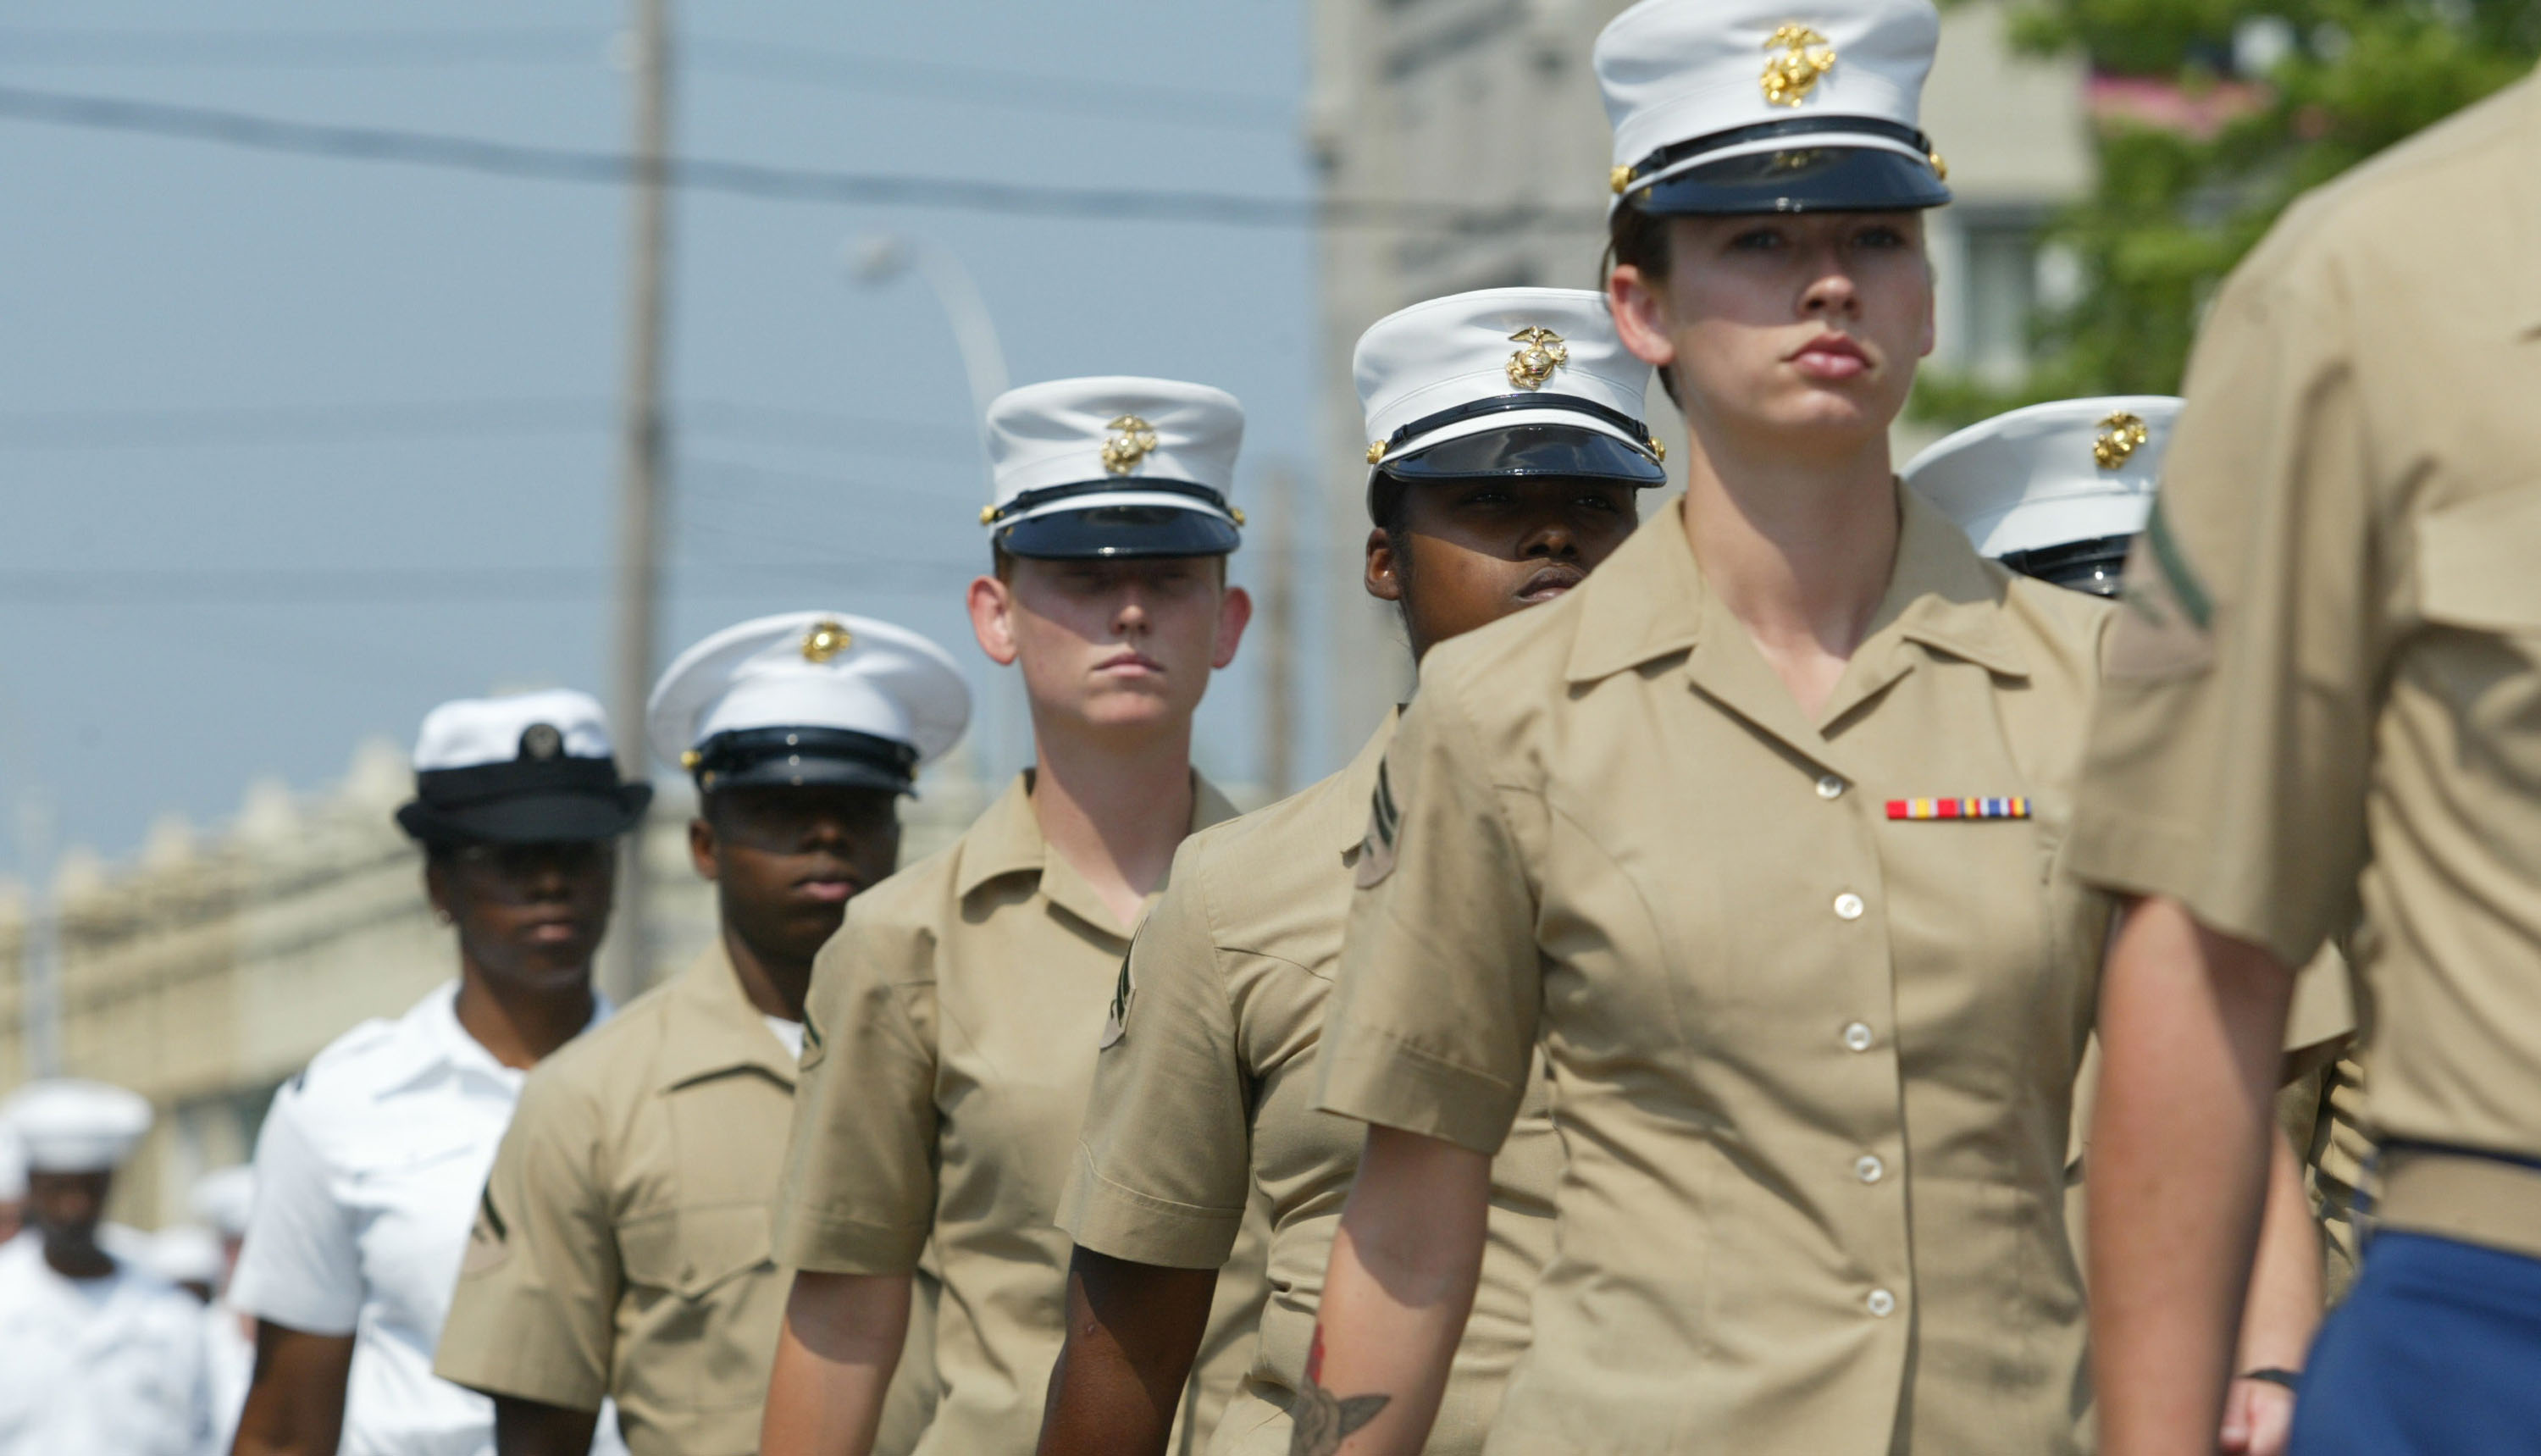 Women Warriors: The ongoing story of integrating and diversifying the  American armed forces